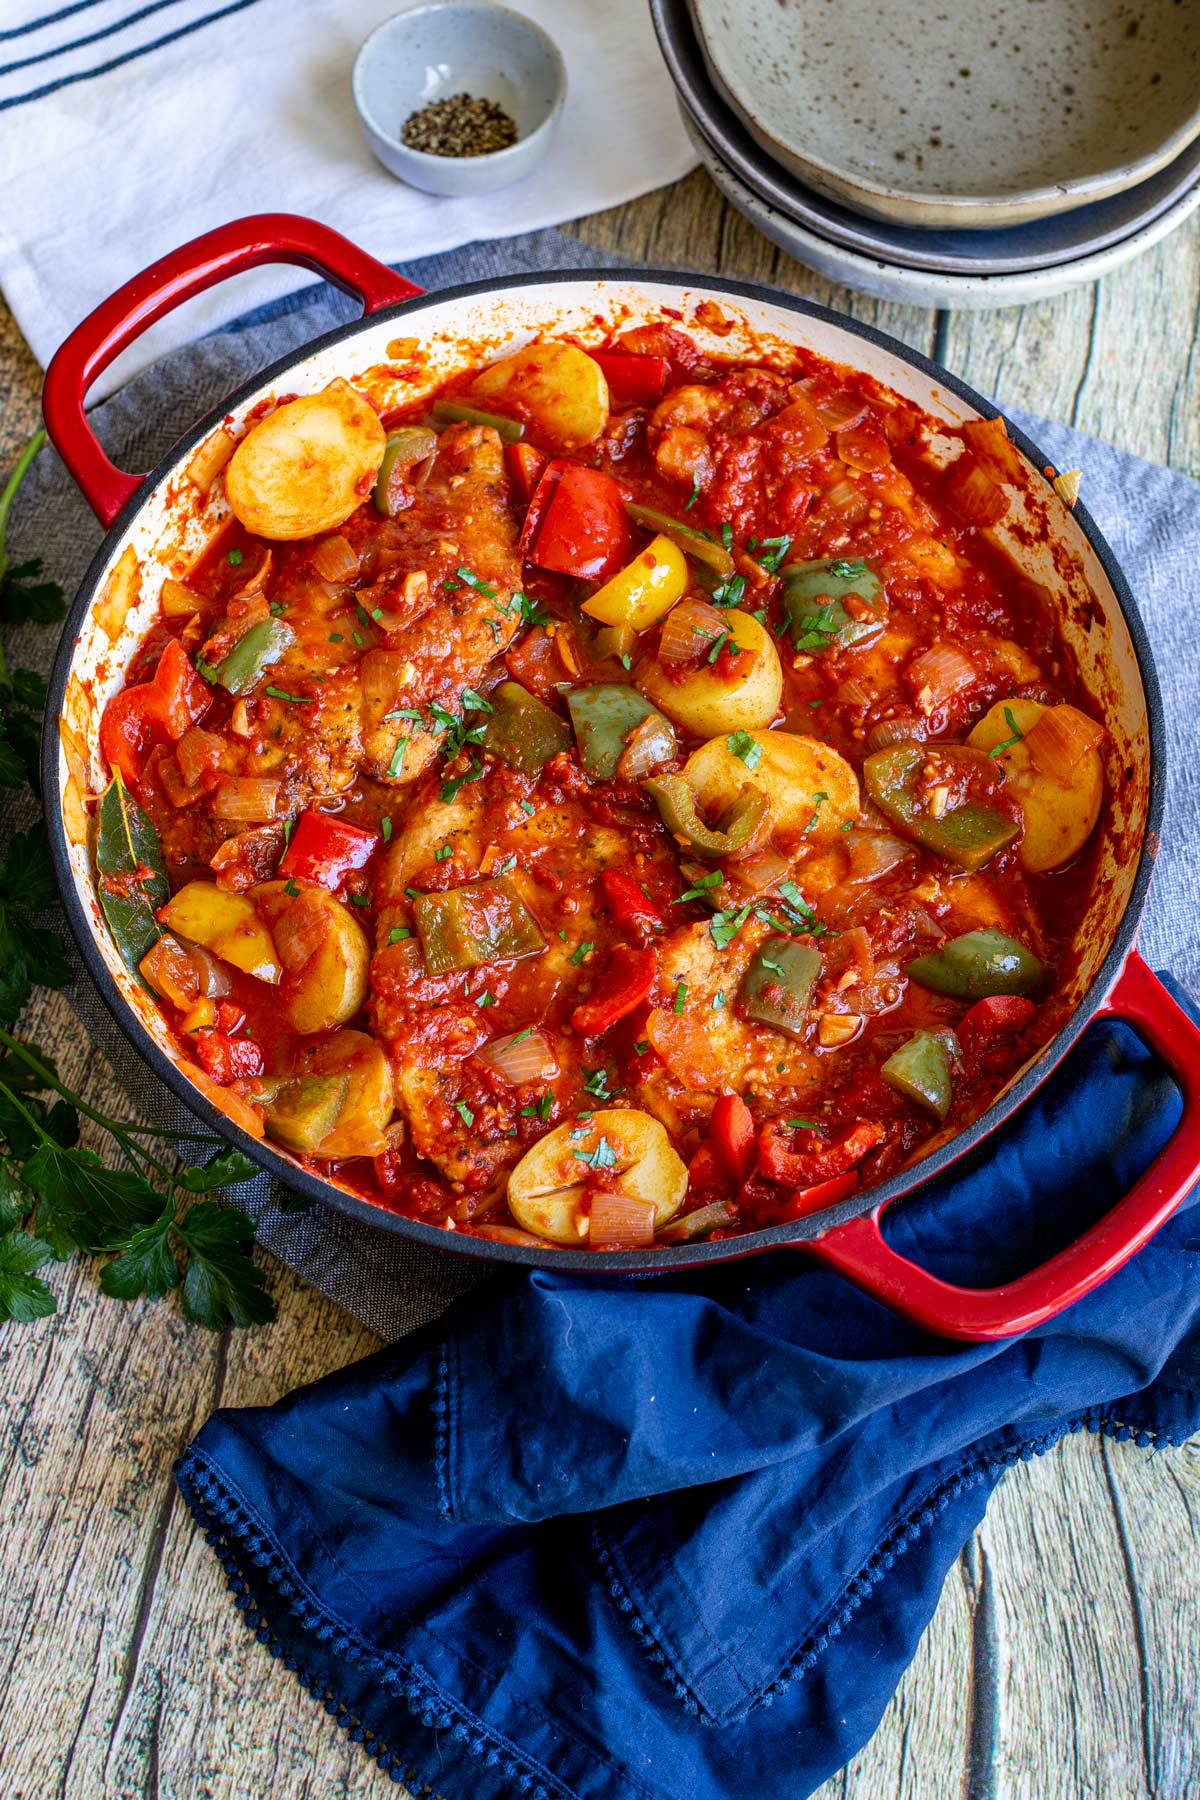 a red cast iron pan filled with tomato, chicken, potatoes and bell peppers